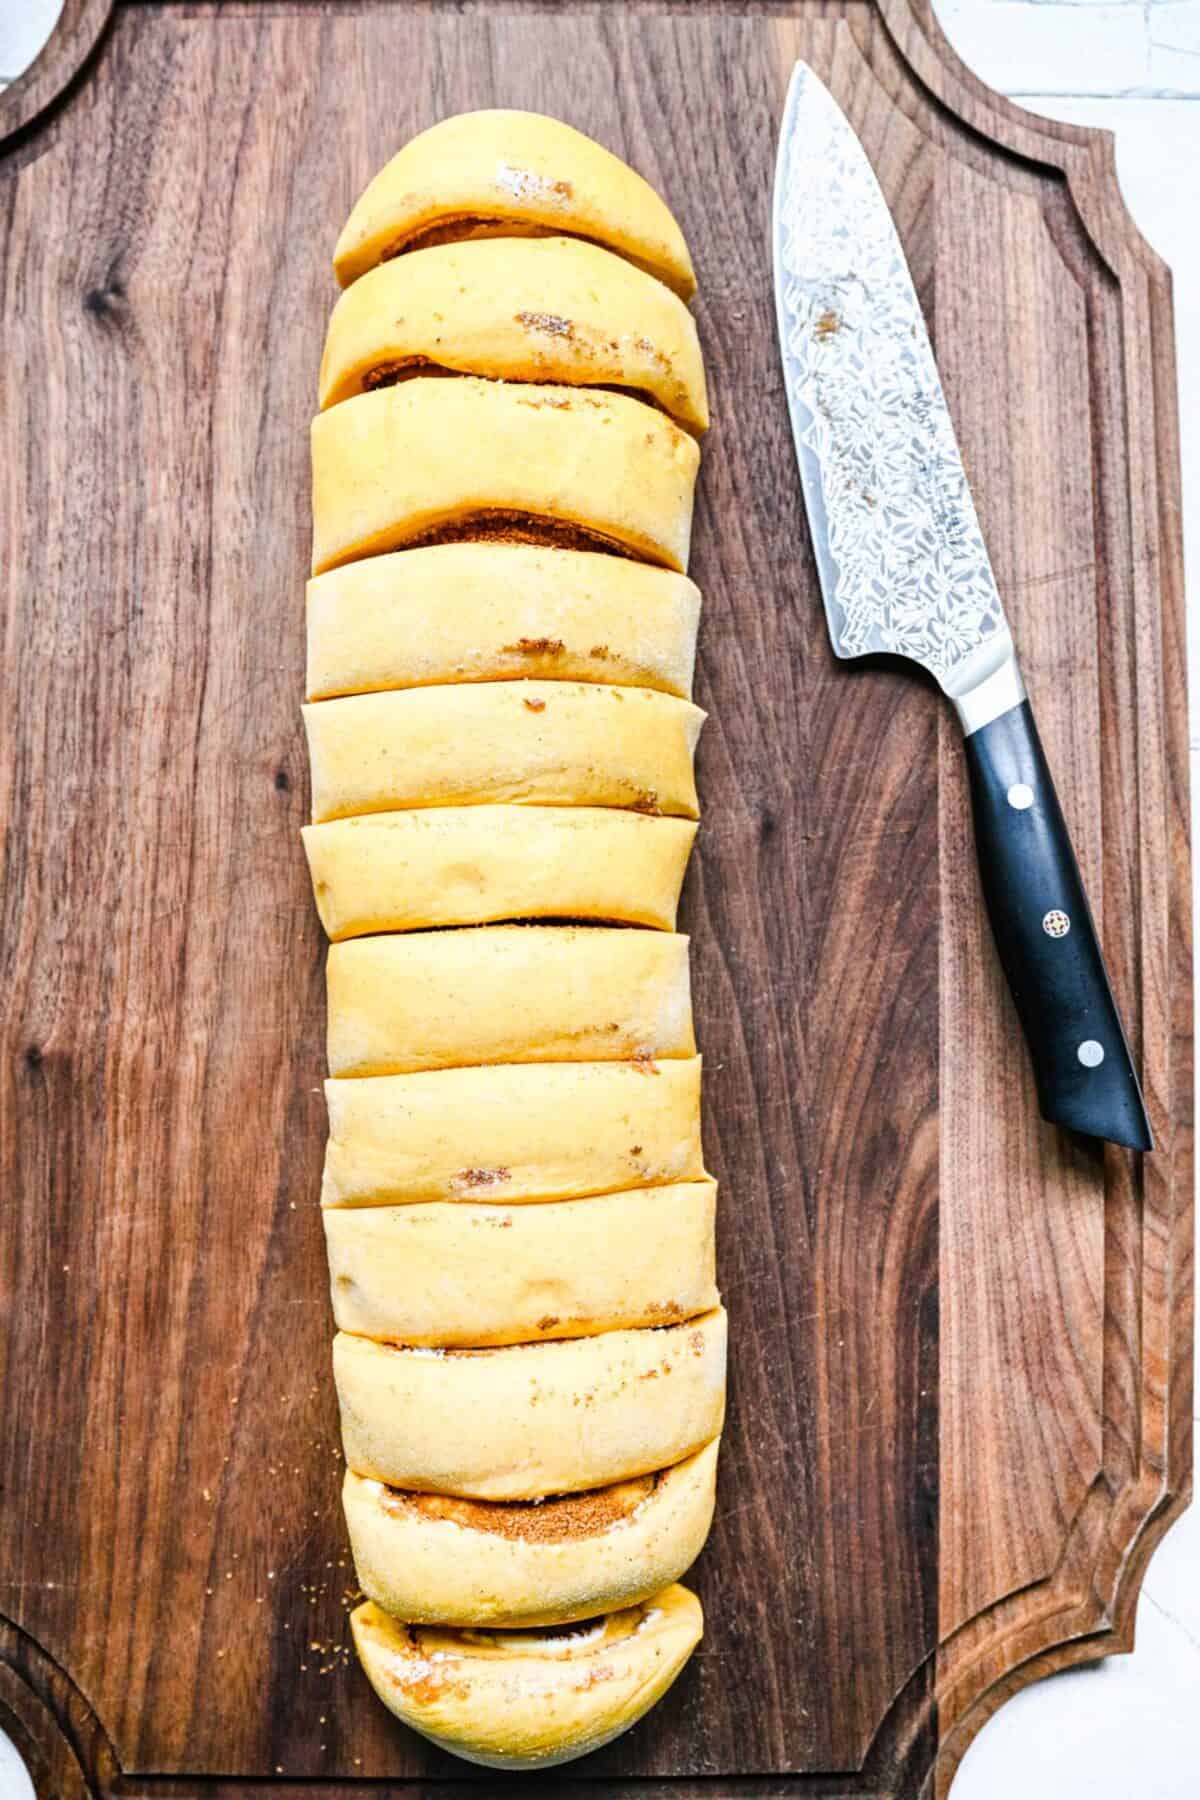 An uncooked log of cinnamon rolls, cut into 12 pieces, on a cutting board next to a chef's knife